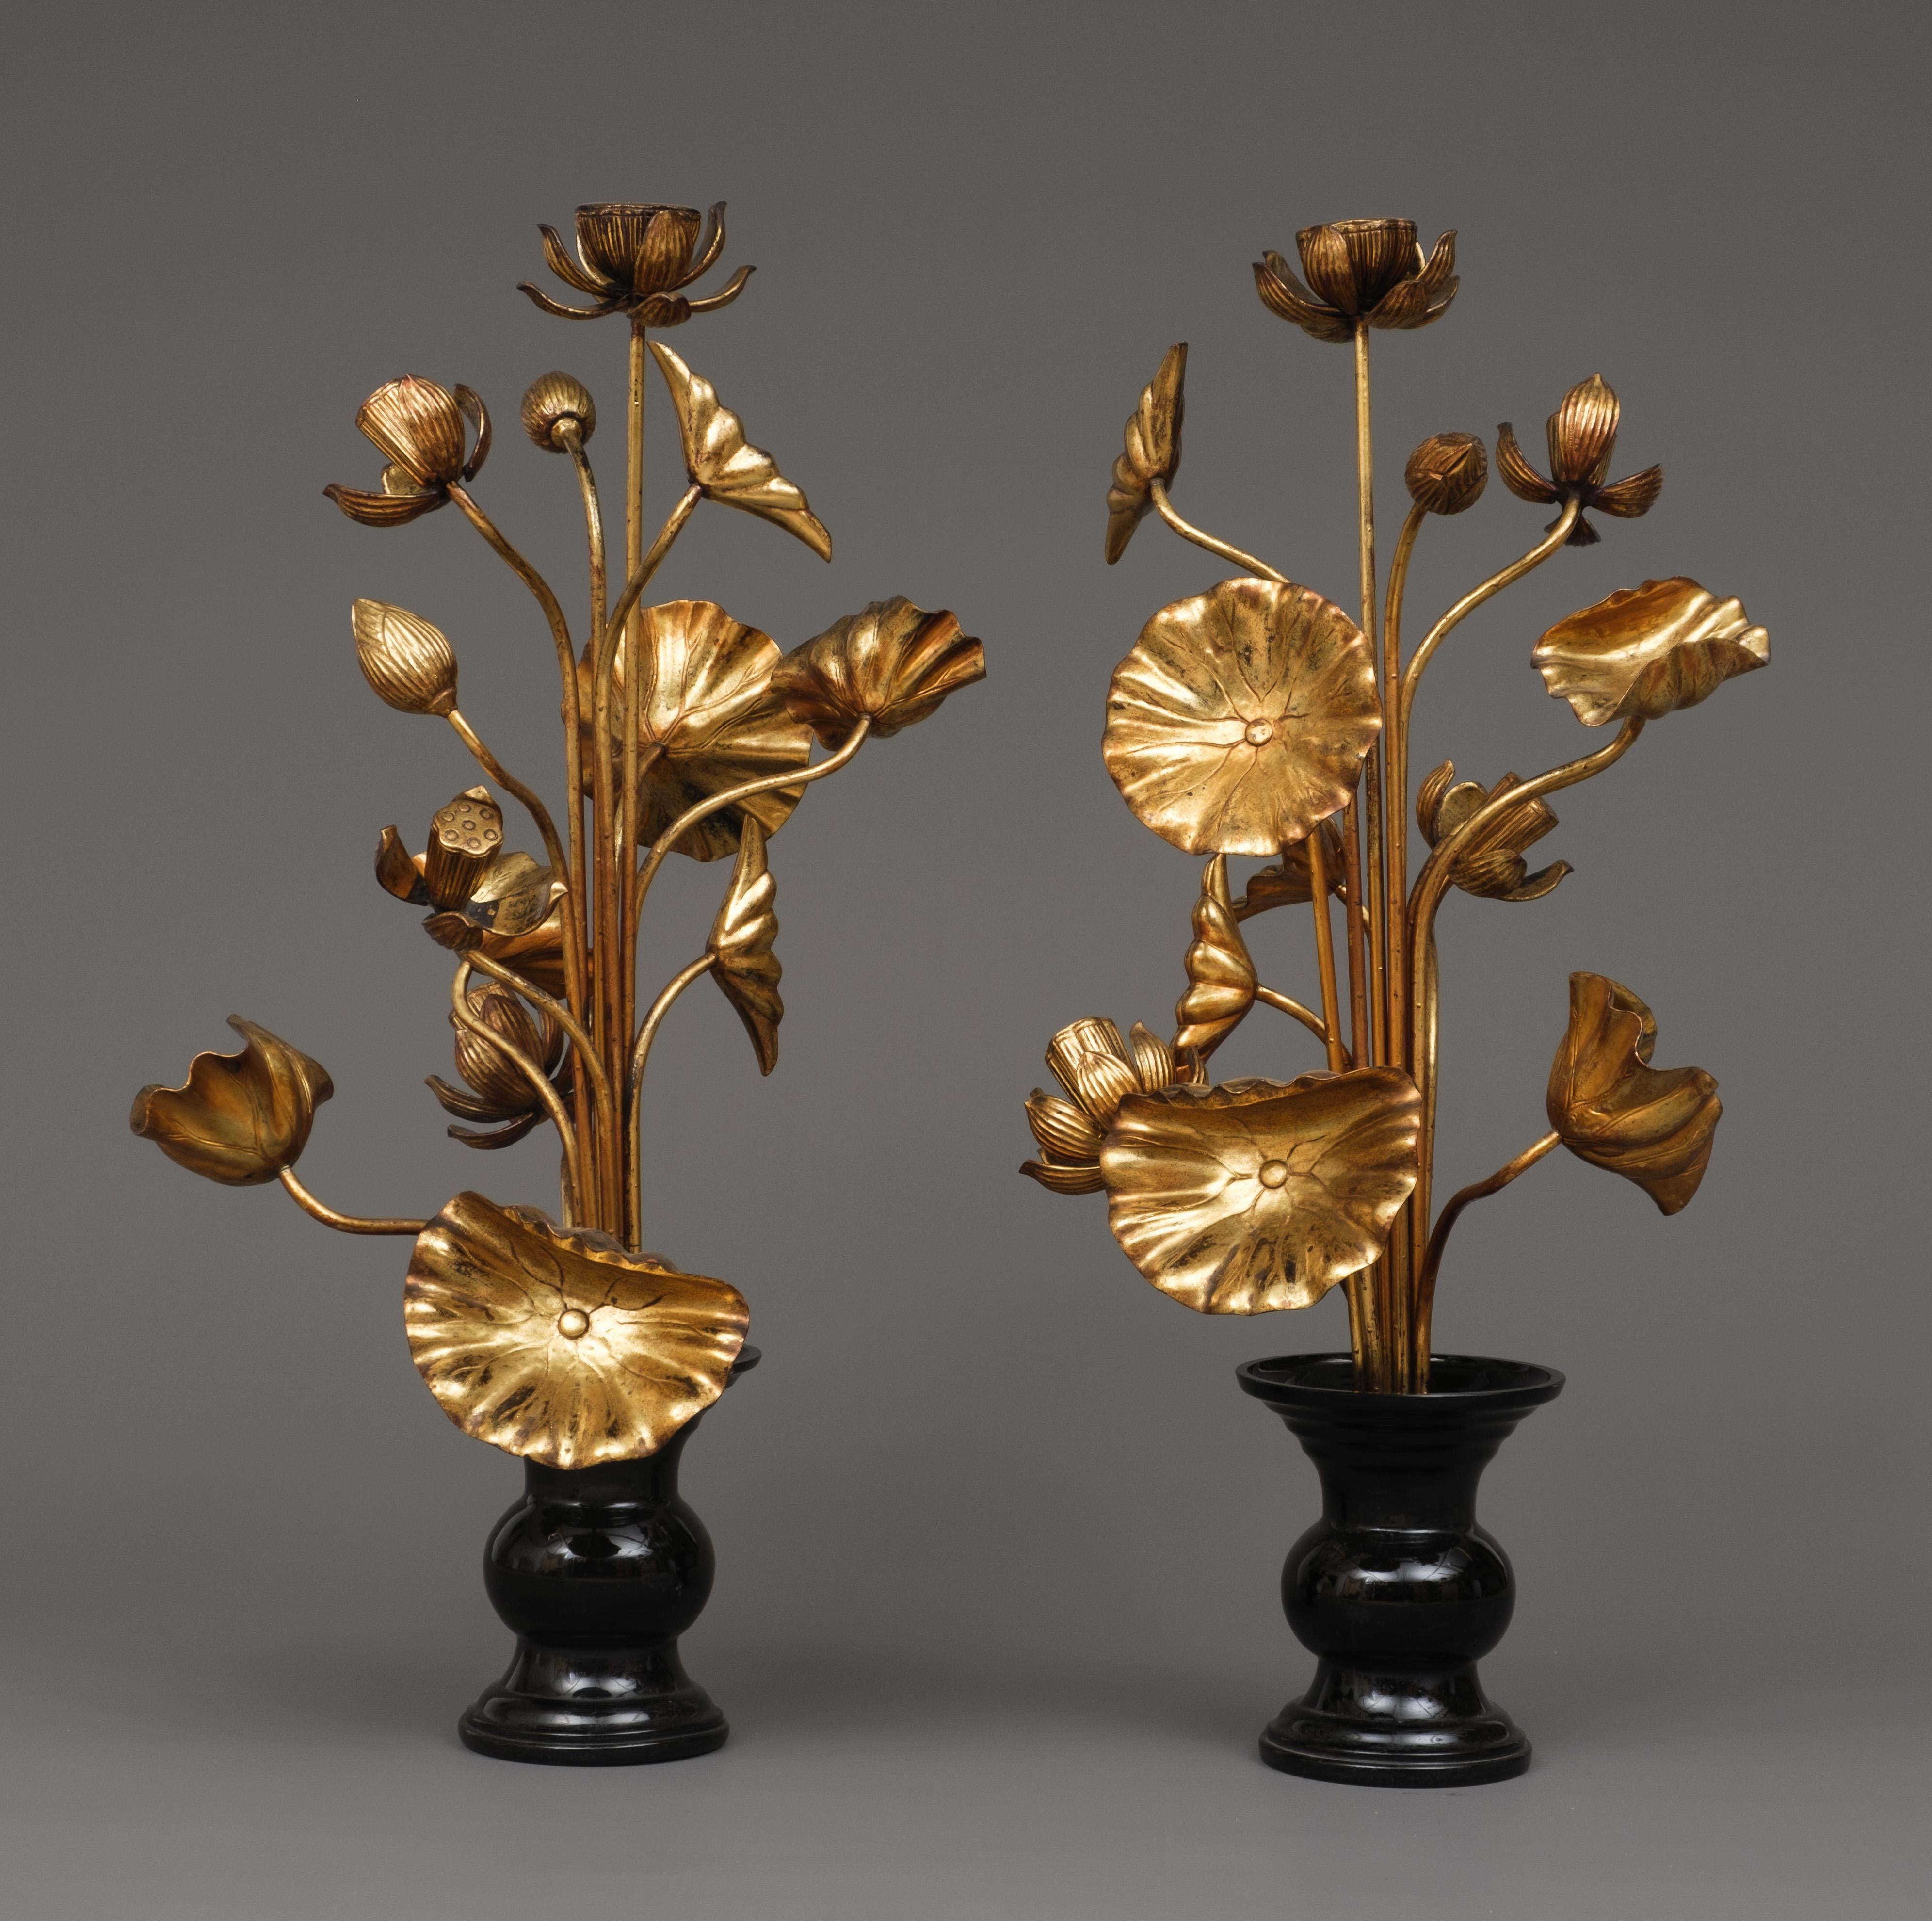 Hand-Carved Large pair of Japanese ‘Jyôka’ 常花, sets of gilded lotus flowers and -leaves. For Sale